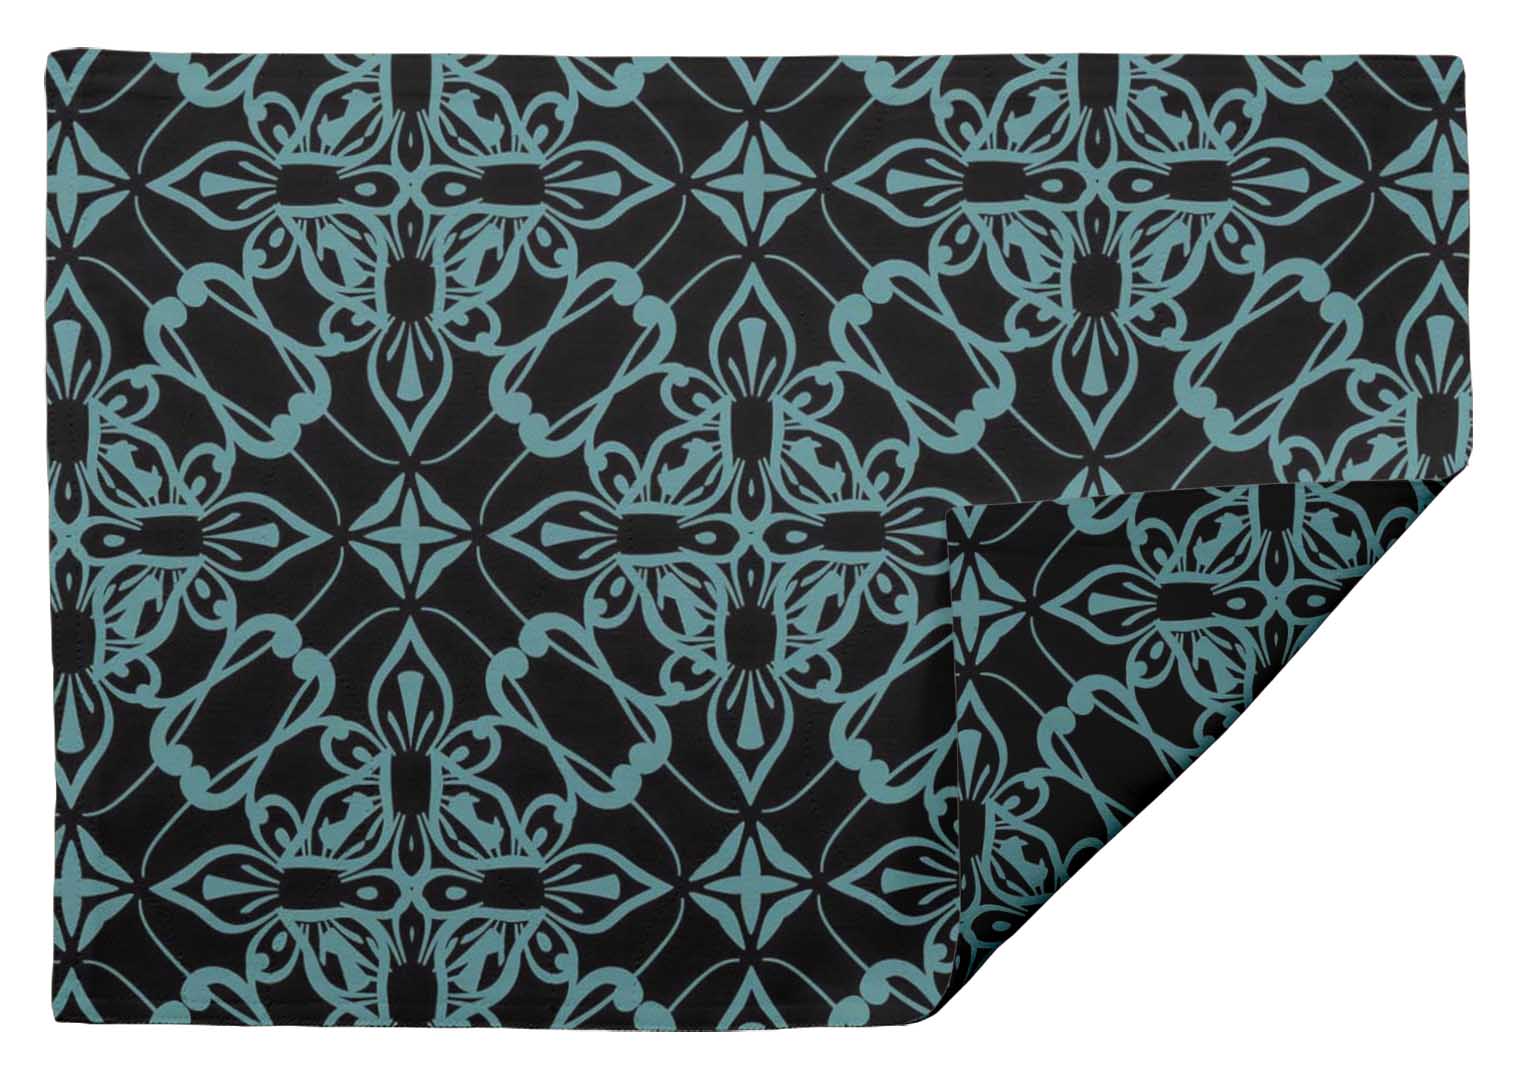 FL-884E S4Sassy Floral Printed Washable Dining Table Mats Reversible Placemat 